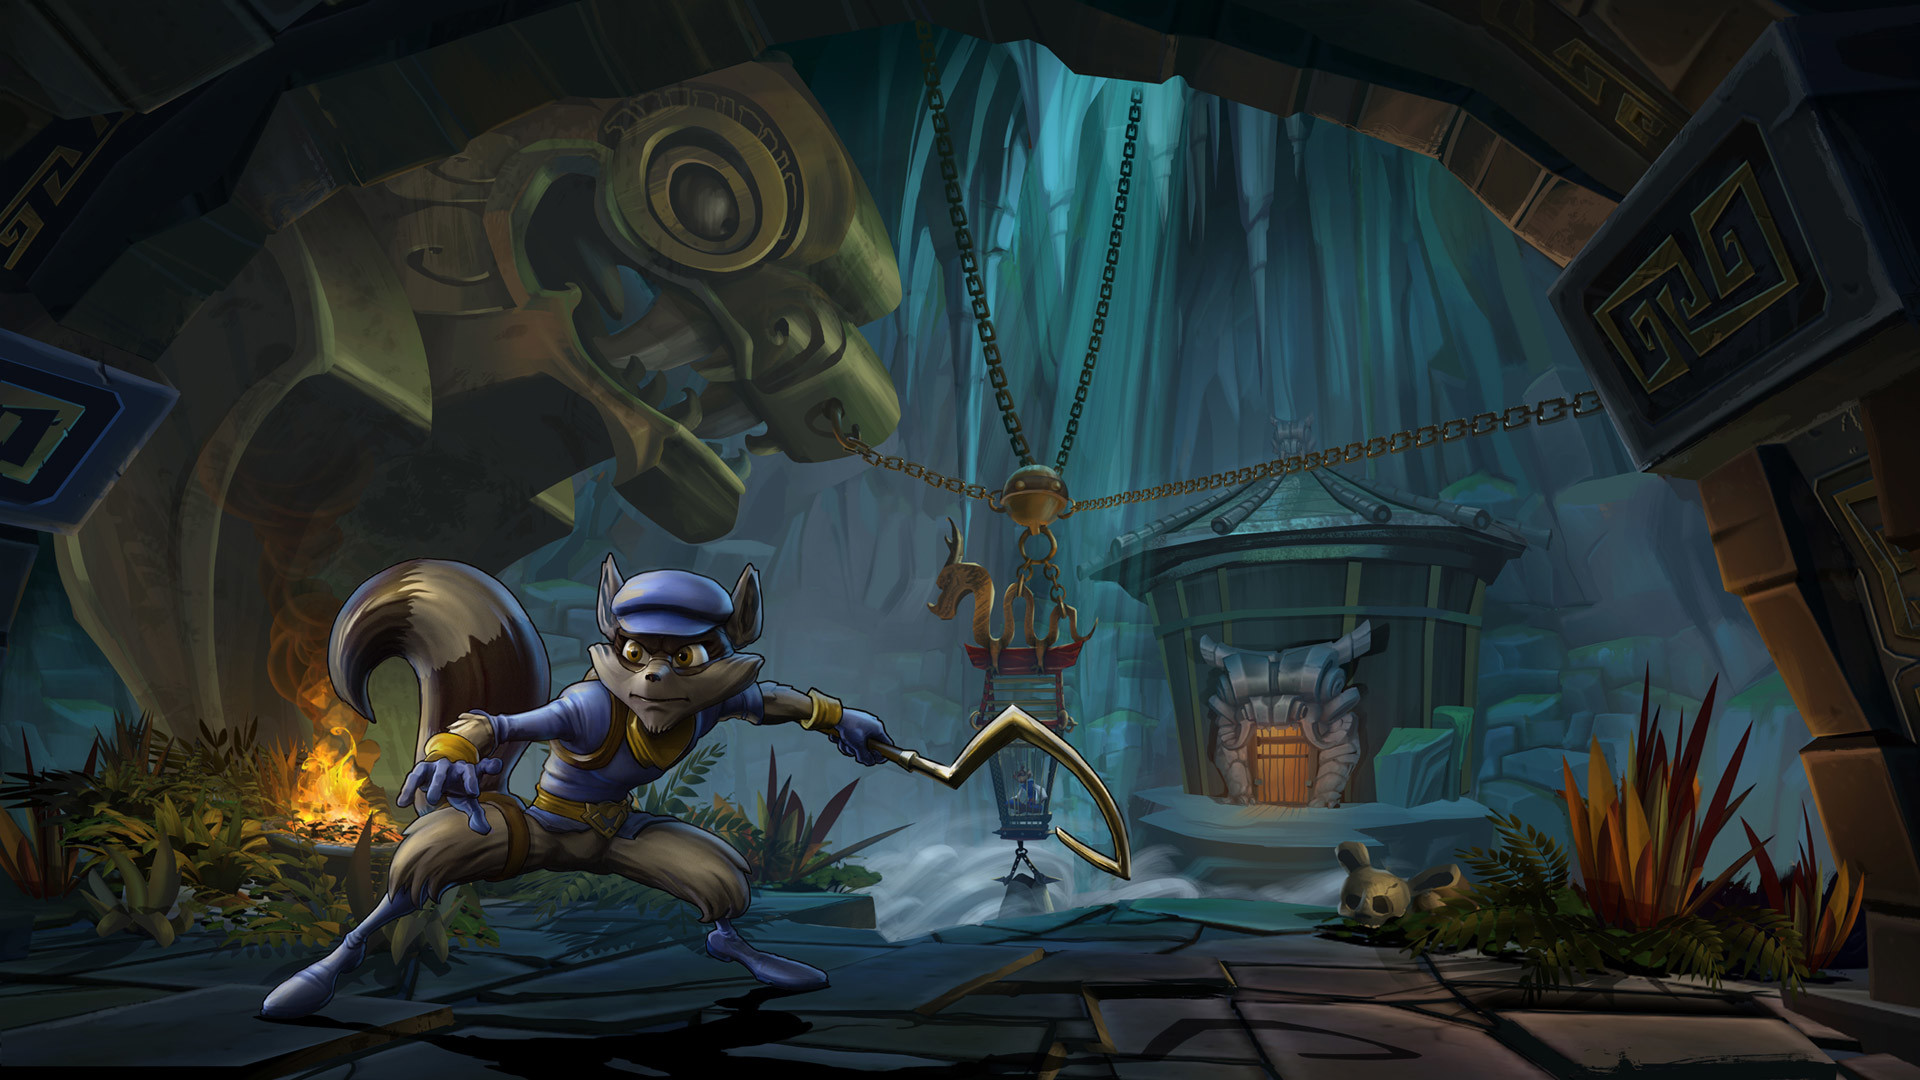 1920x1080 Free Sly Cooper: Thieves in Time Wallpaper in 